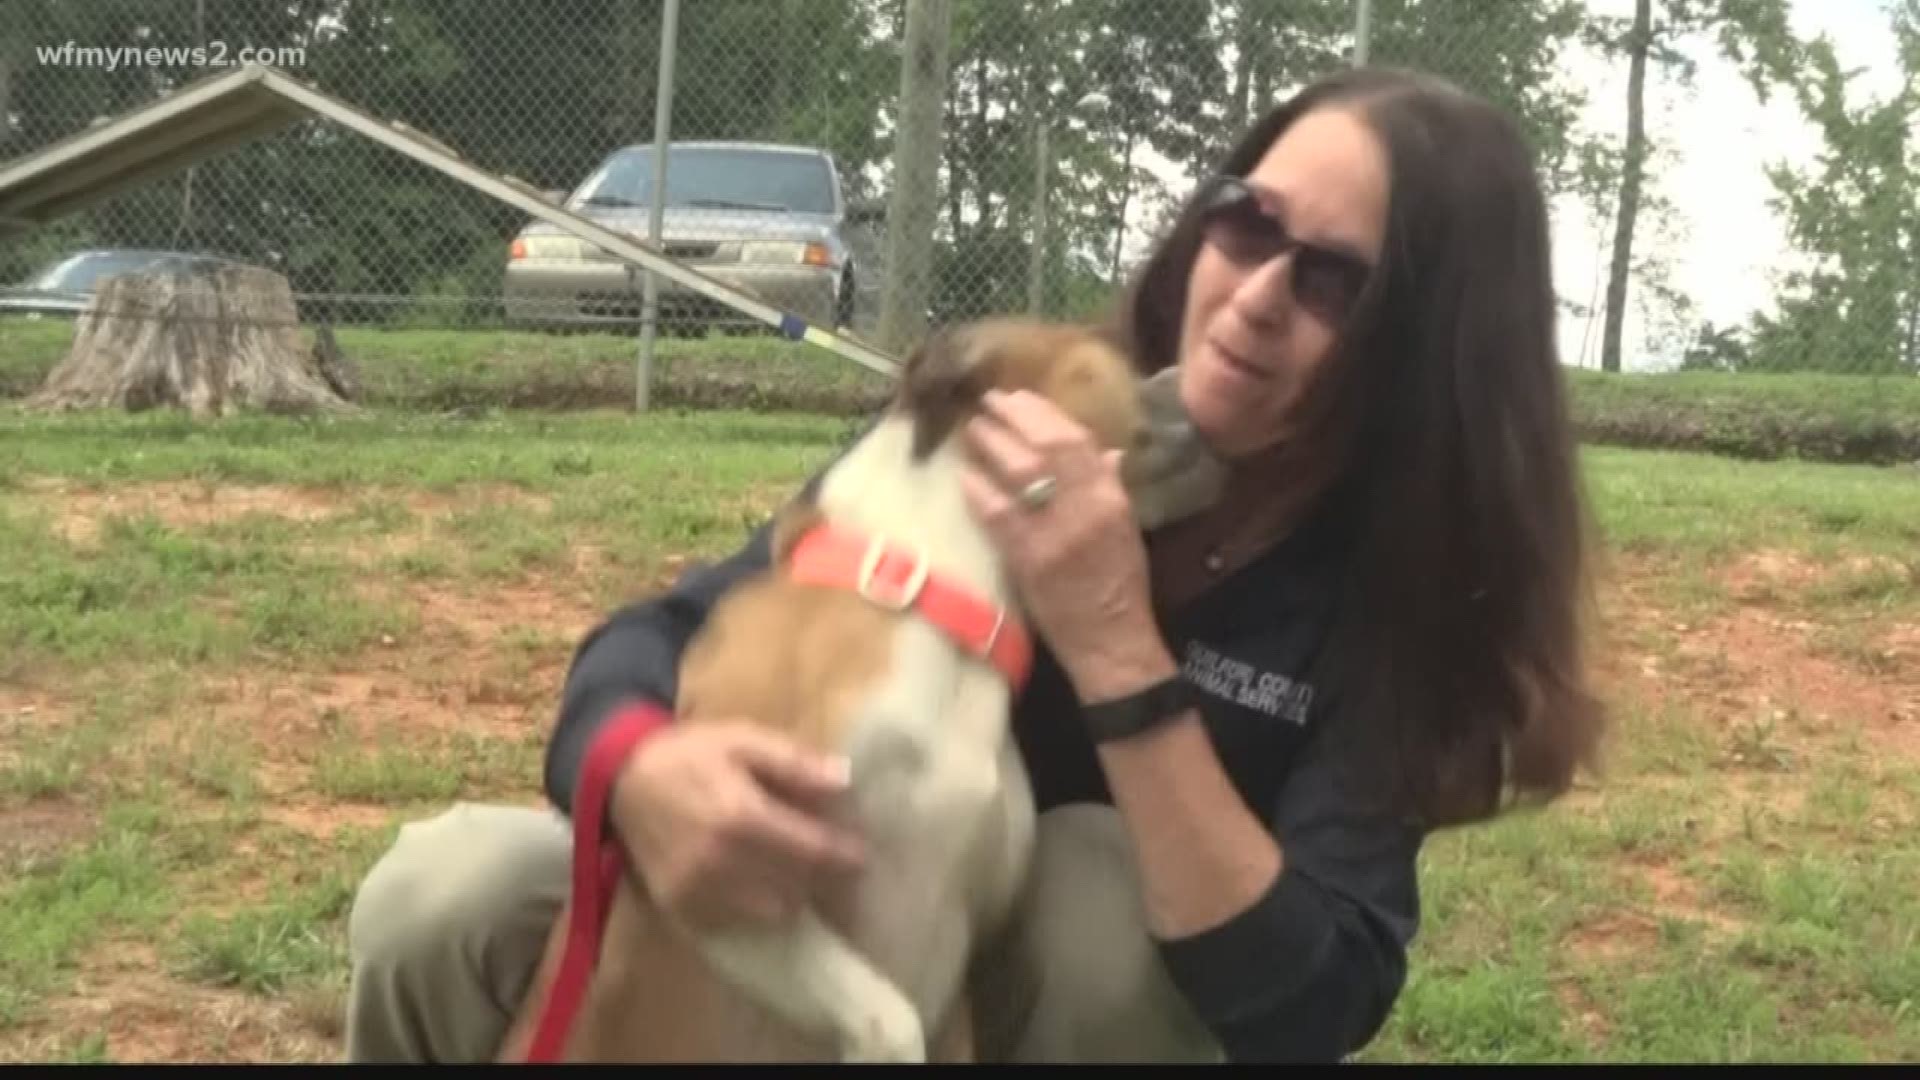 41 new animals came to the Guilford County Animal Shelter Thursda- and management says they could fill up and may have to turn animals away.